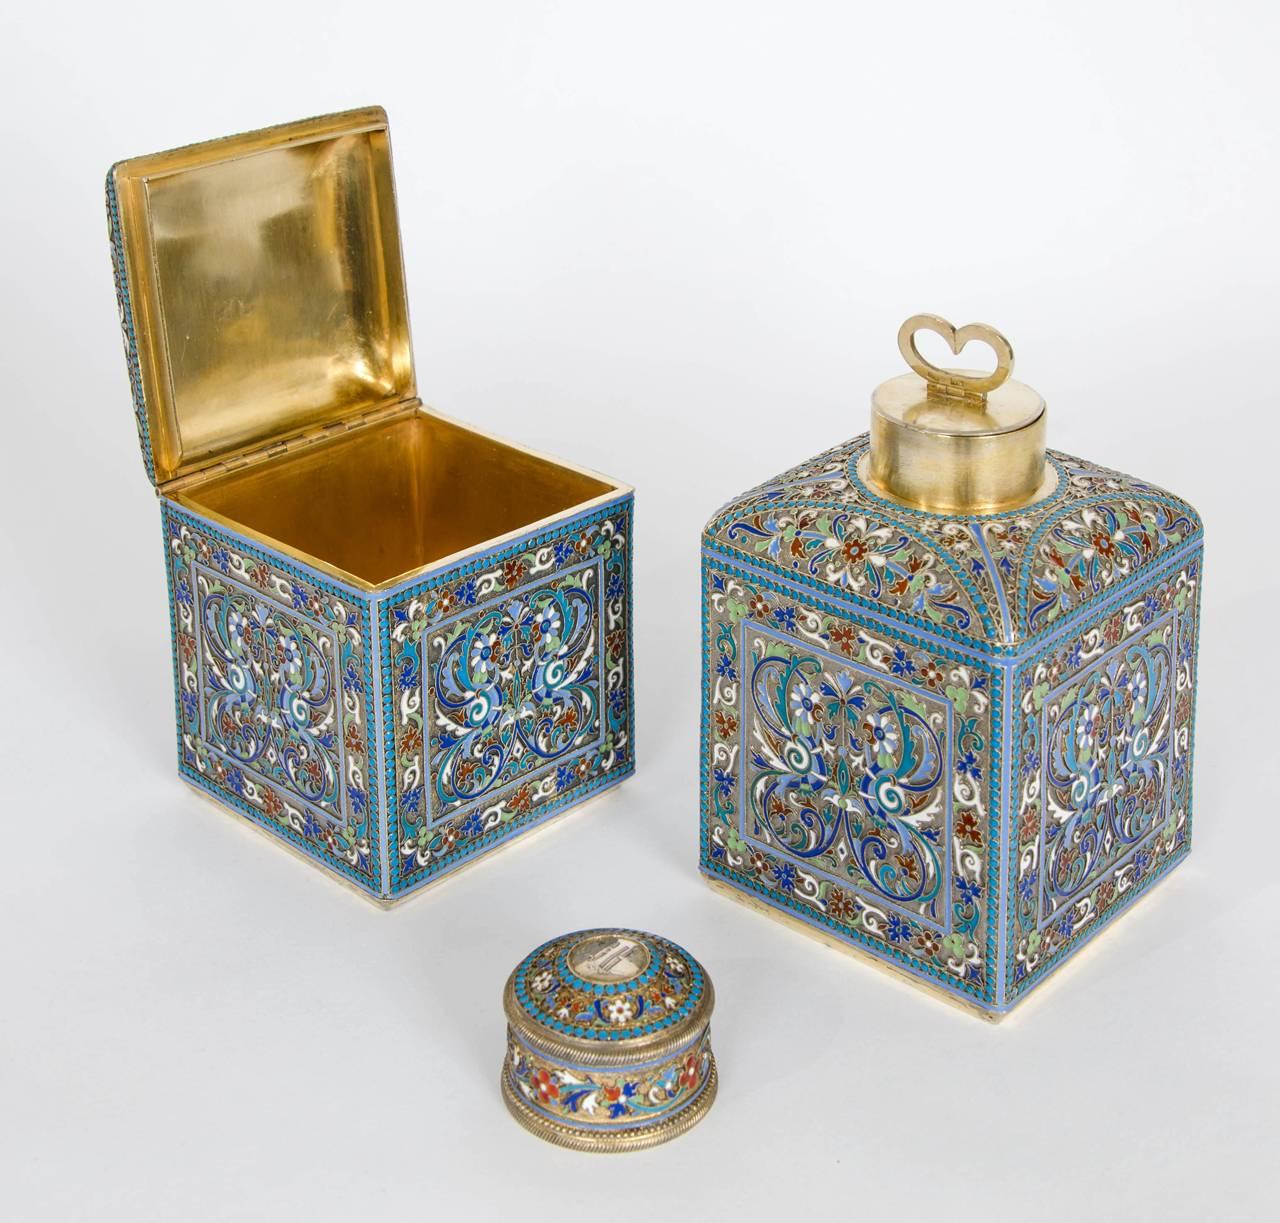 This beautifully enamelled set of two boxes dates from late Imperial Russia, and consist of a tea caddy and a sugar box. These will make excellent additions to a kitchen, and are beautiful decorative objects too. The interior of each box is lined